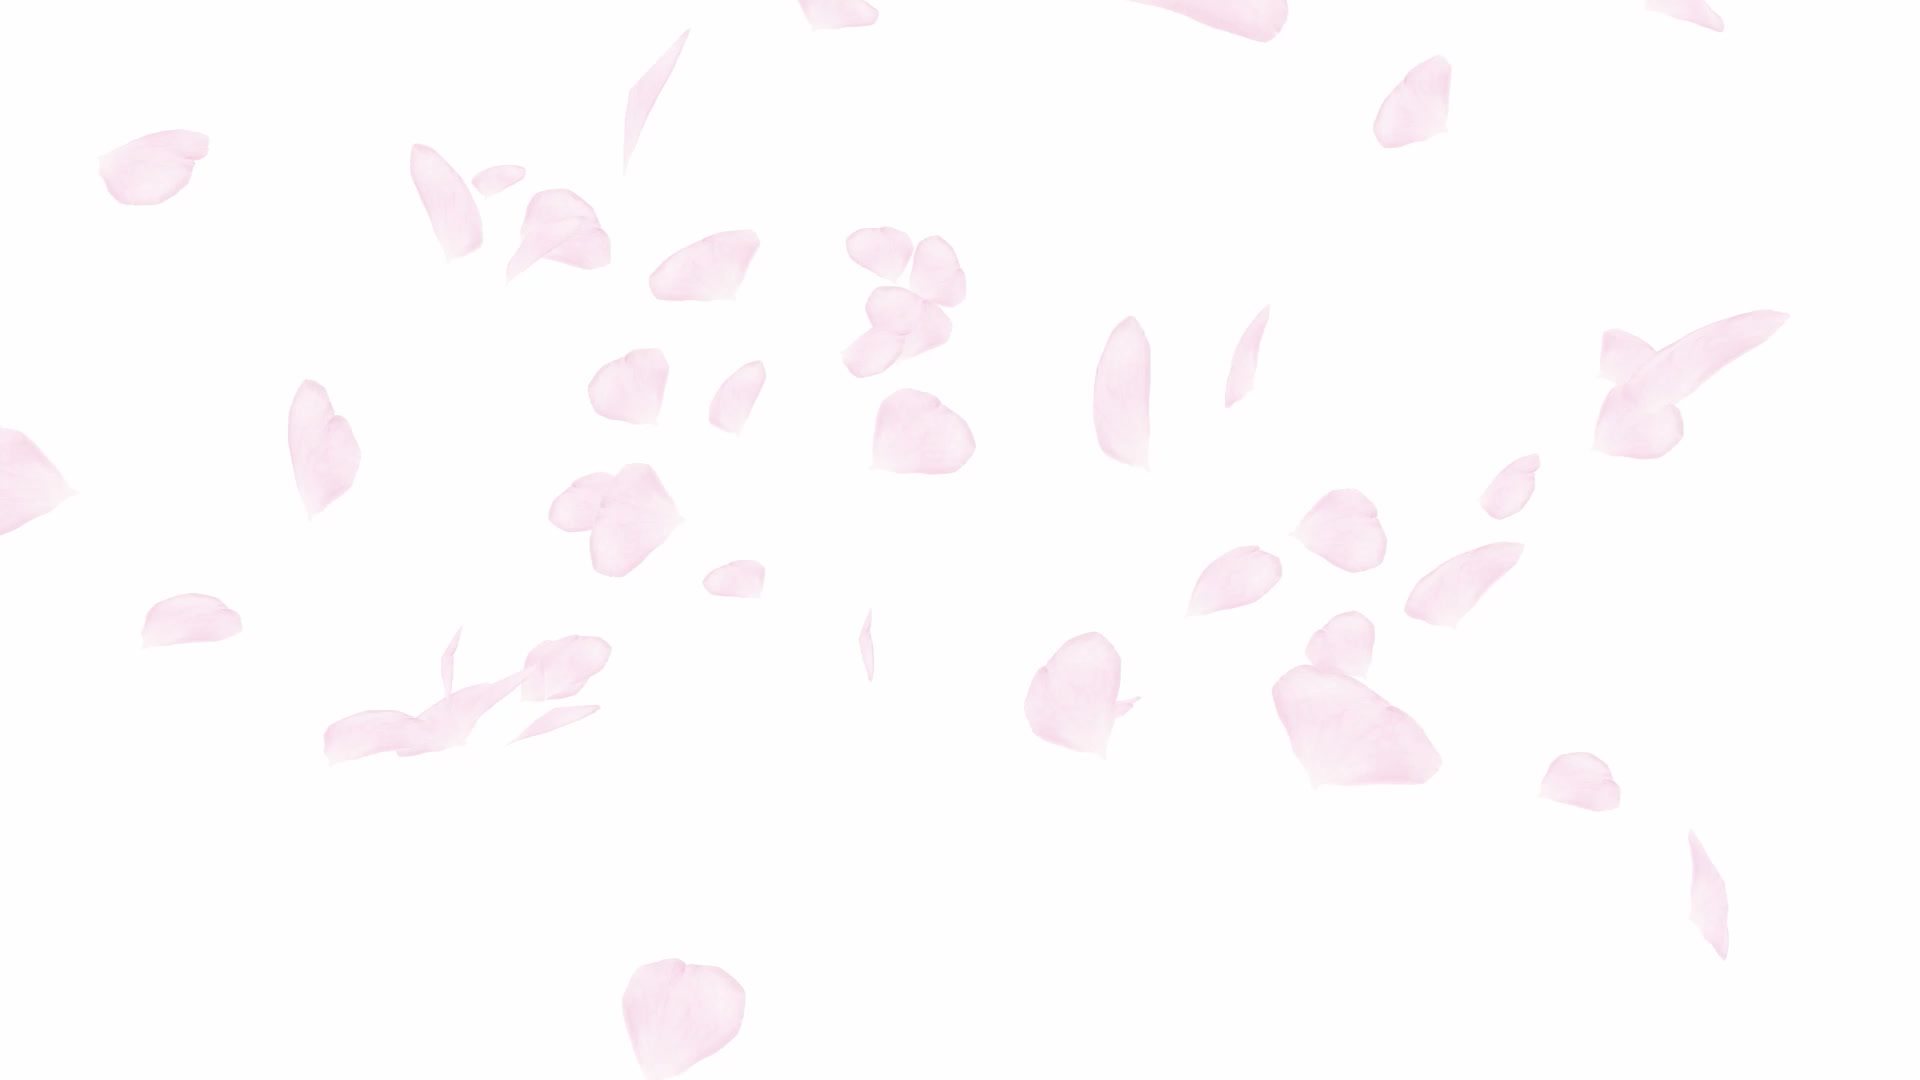 Video of pink rose petals rotating and slowly flying through the air